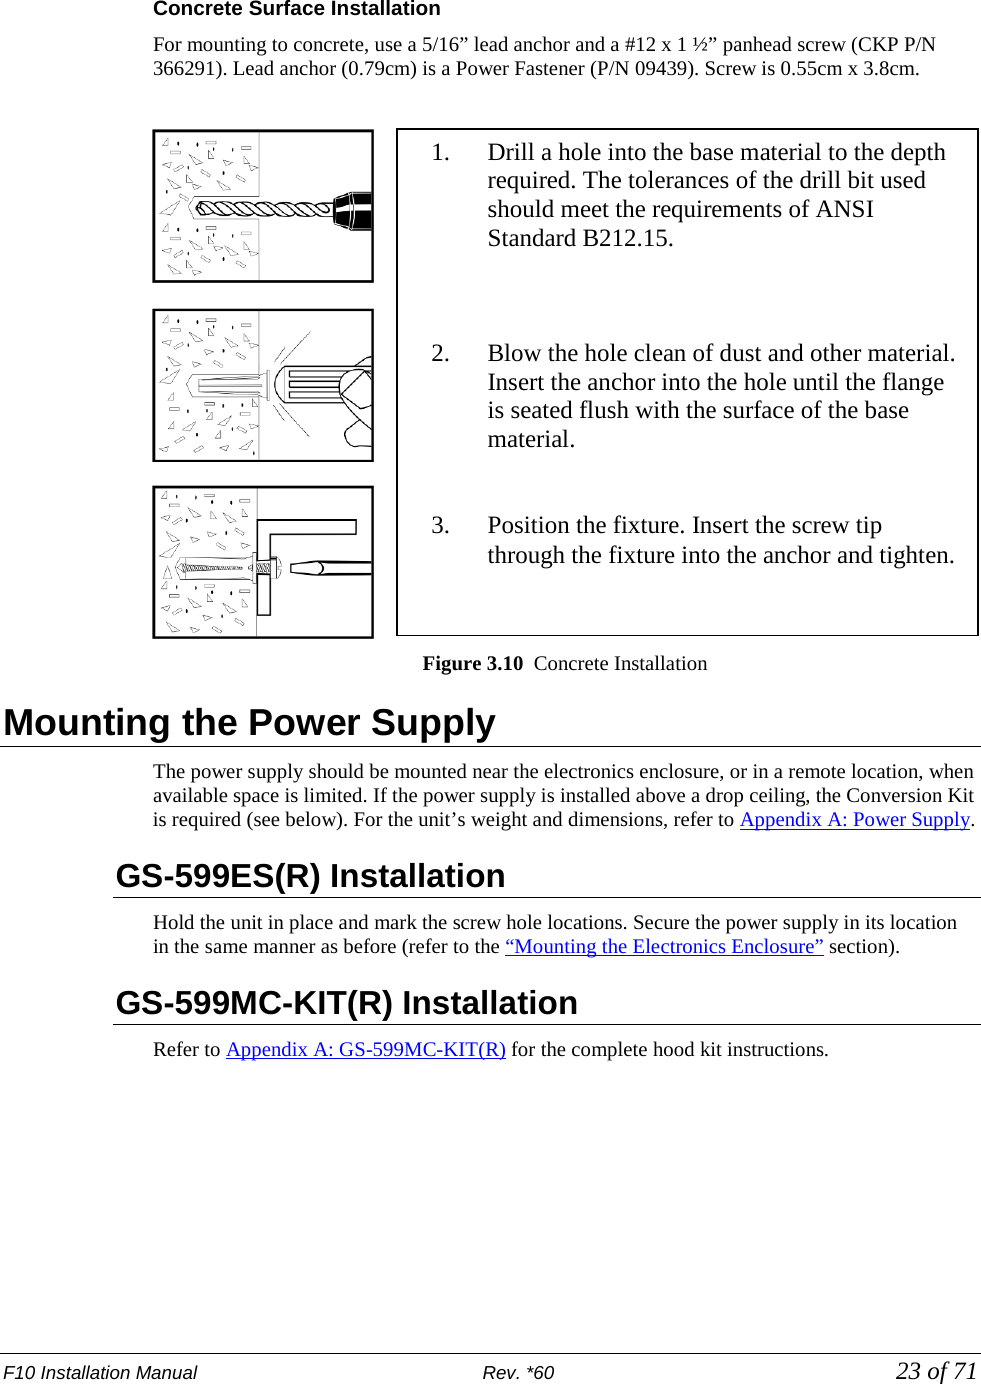 F10 Installation Manual                          Rev. *60            23 of 71  Concrete Surface Installation For mounting to concrete, use a 5/16” lead anchor and a #12 x 1 ½” panhead screw (CKP P/N 366291). Lead anchor (0.79cm) is a Power Fastener (P/N 09439). Screw is 0.55cm x 3.8cm.   Figure 3.10  Concrete Installation Mounting the Power Supply The power supply should be mounted near the electronics enclosure, or in a remote location, when available space is limited. If the power supply is installed above a drop ceiling, the Conversion Kit is required (see below). For the unit’s weight and dimensions, refer to Appendix A: Power Supply. GS-599ES(R) Installation  Hold the unit in place and mark the screw hole locations. Secure the power supply in its location in the same manner as before (refer to the “Mounting the Electronics Enclosure” section).  GS-599MC-KIT(R) Installation Refer to Appendix A: GS-599MC-KIT(R) for the complete hood kit instructions.      1. Drill a hole into the base material to the depth required. The tolerances of the drill bit used should meet the requirements of ANSI Standard B212.15.    2. Blow the hole clean of dust and other material. Insert the anchor into the hole until the flange is seated flush with the surface of the base material.   3. Position the fixture. Insert the screw tip through the fixture into the anchor and tighten. 